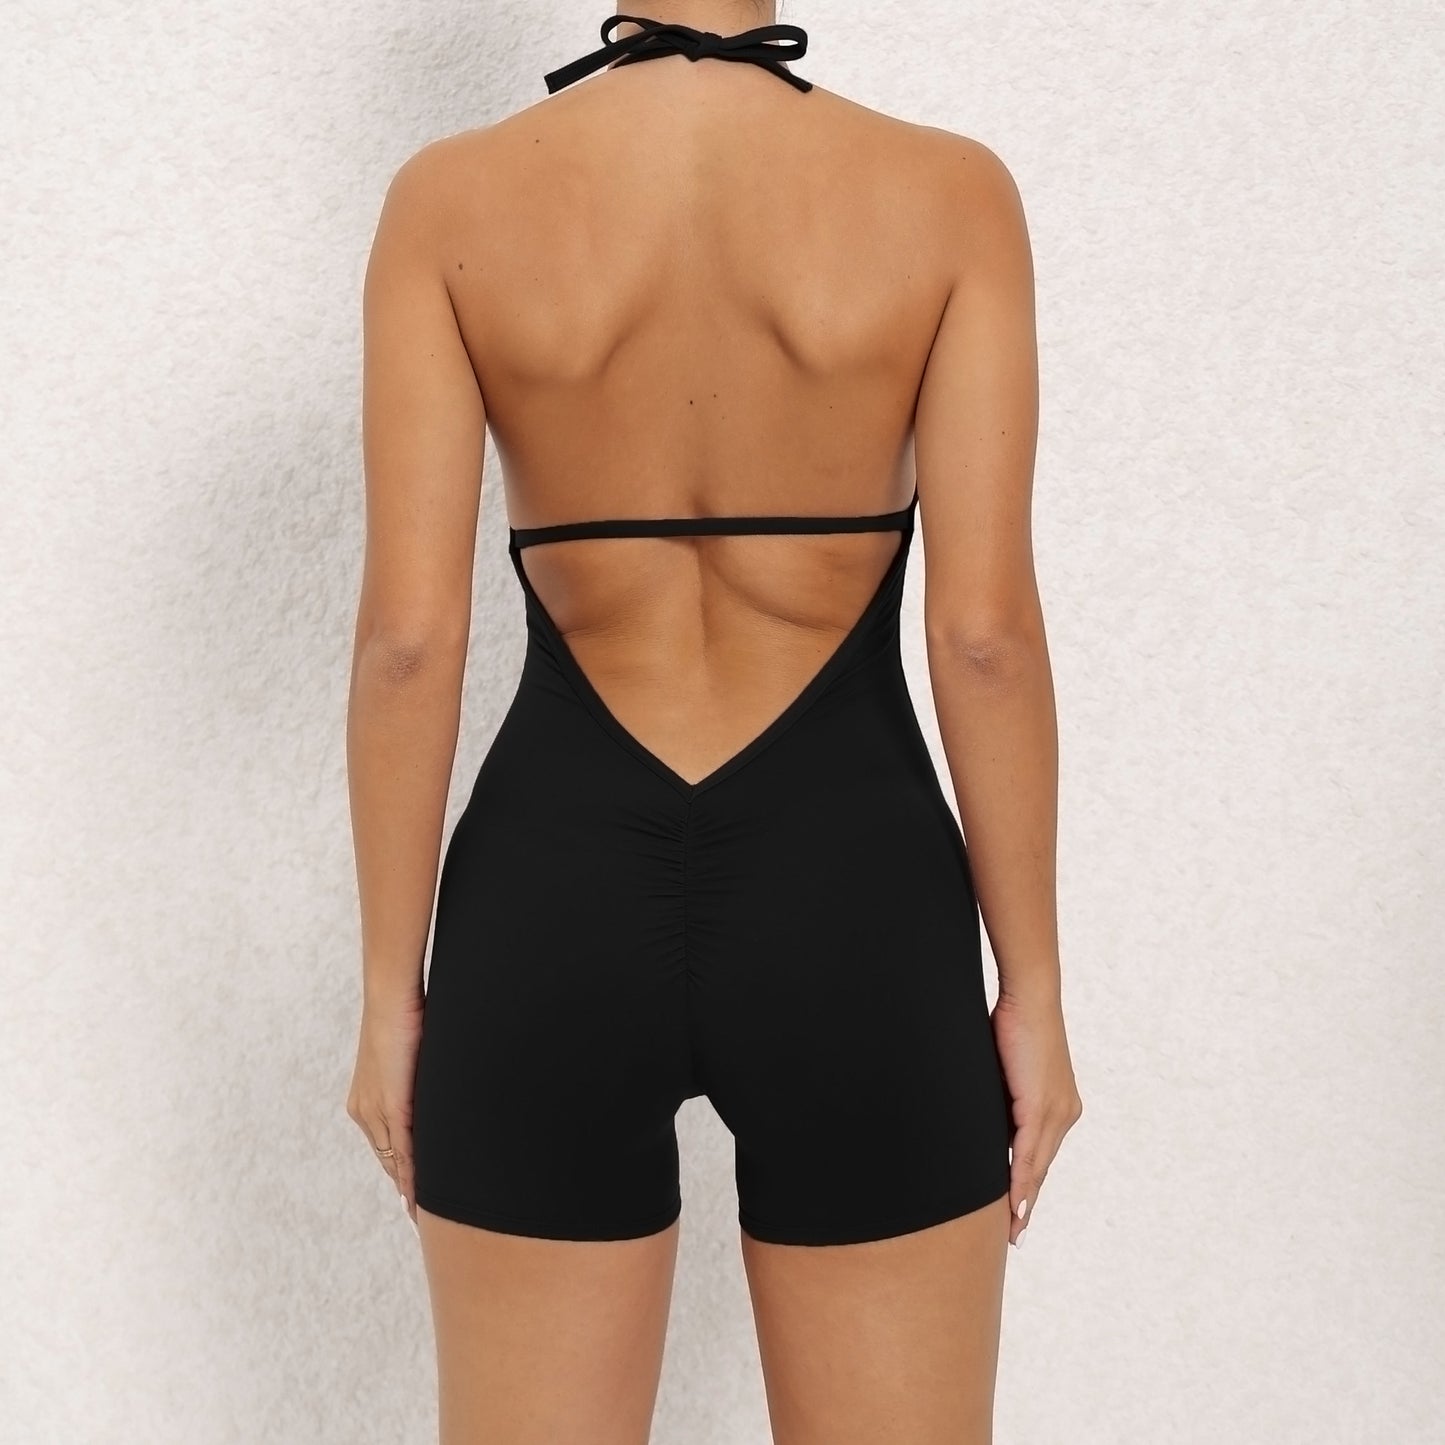 Yoga Pants Halter Neck Jumpsuit - Beauty Back Shorts High Elastic One-piece Fitness Wear for Women